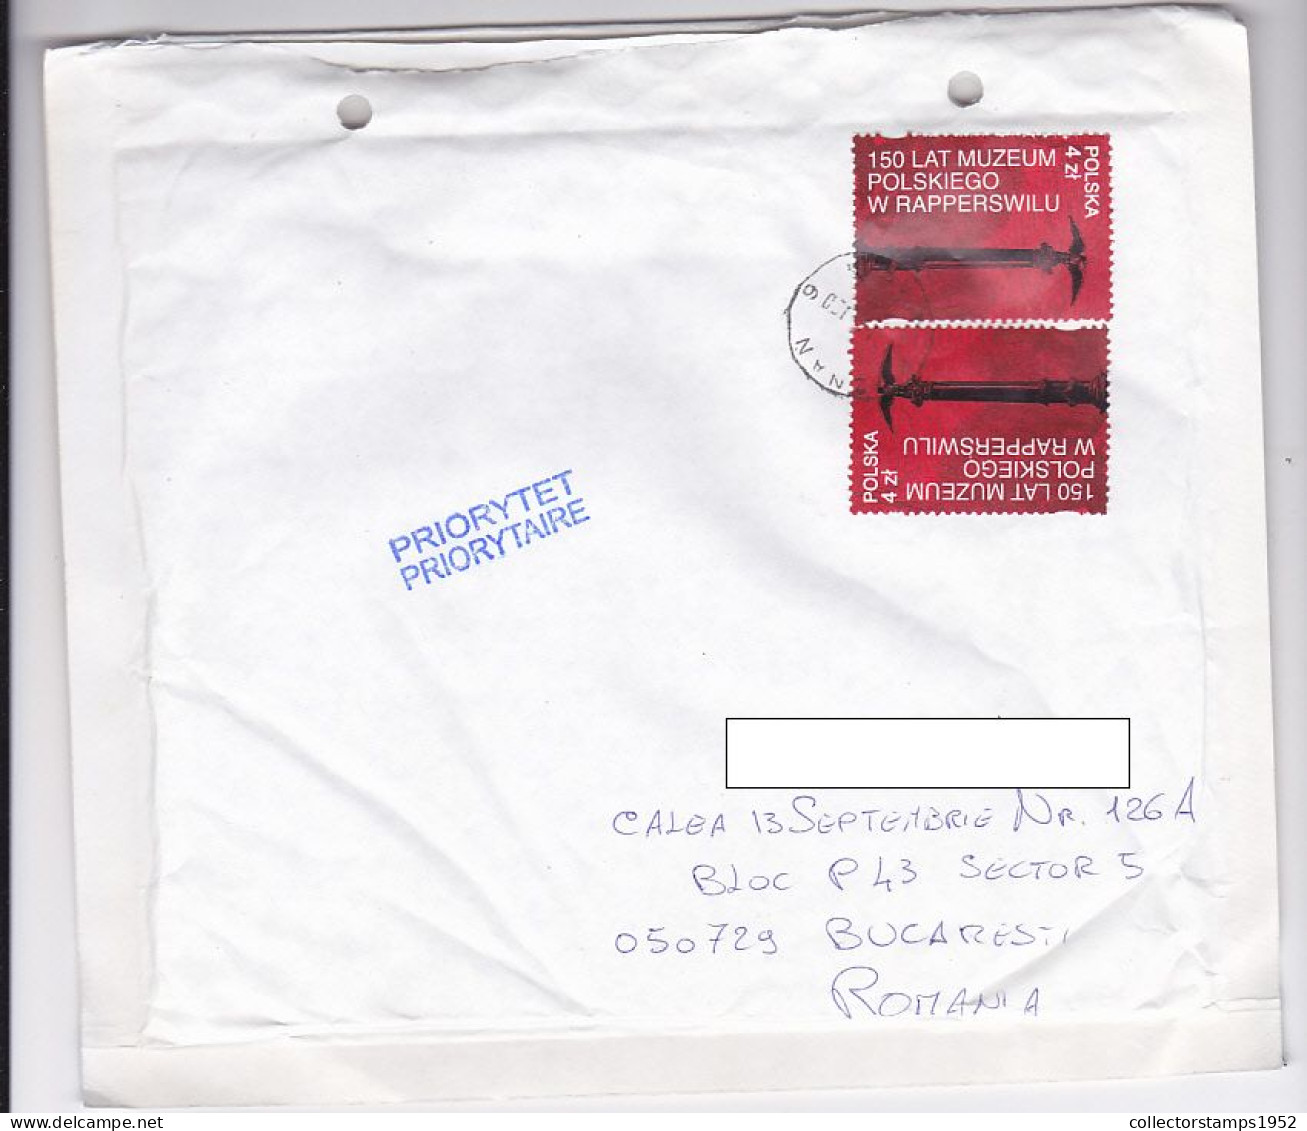 MUSEUM, FINE STAMP ON COVER, 2020, POLAND - Covers & Documents